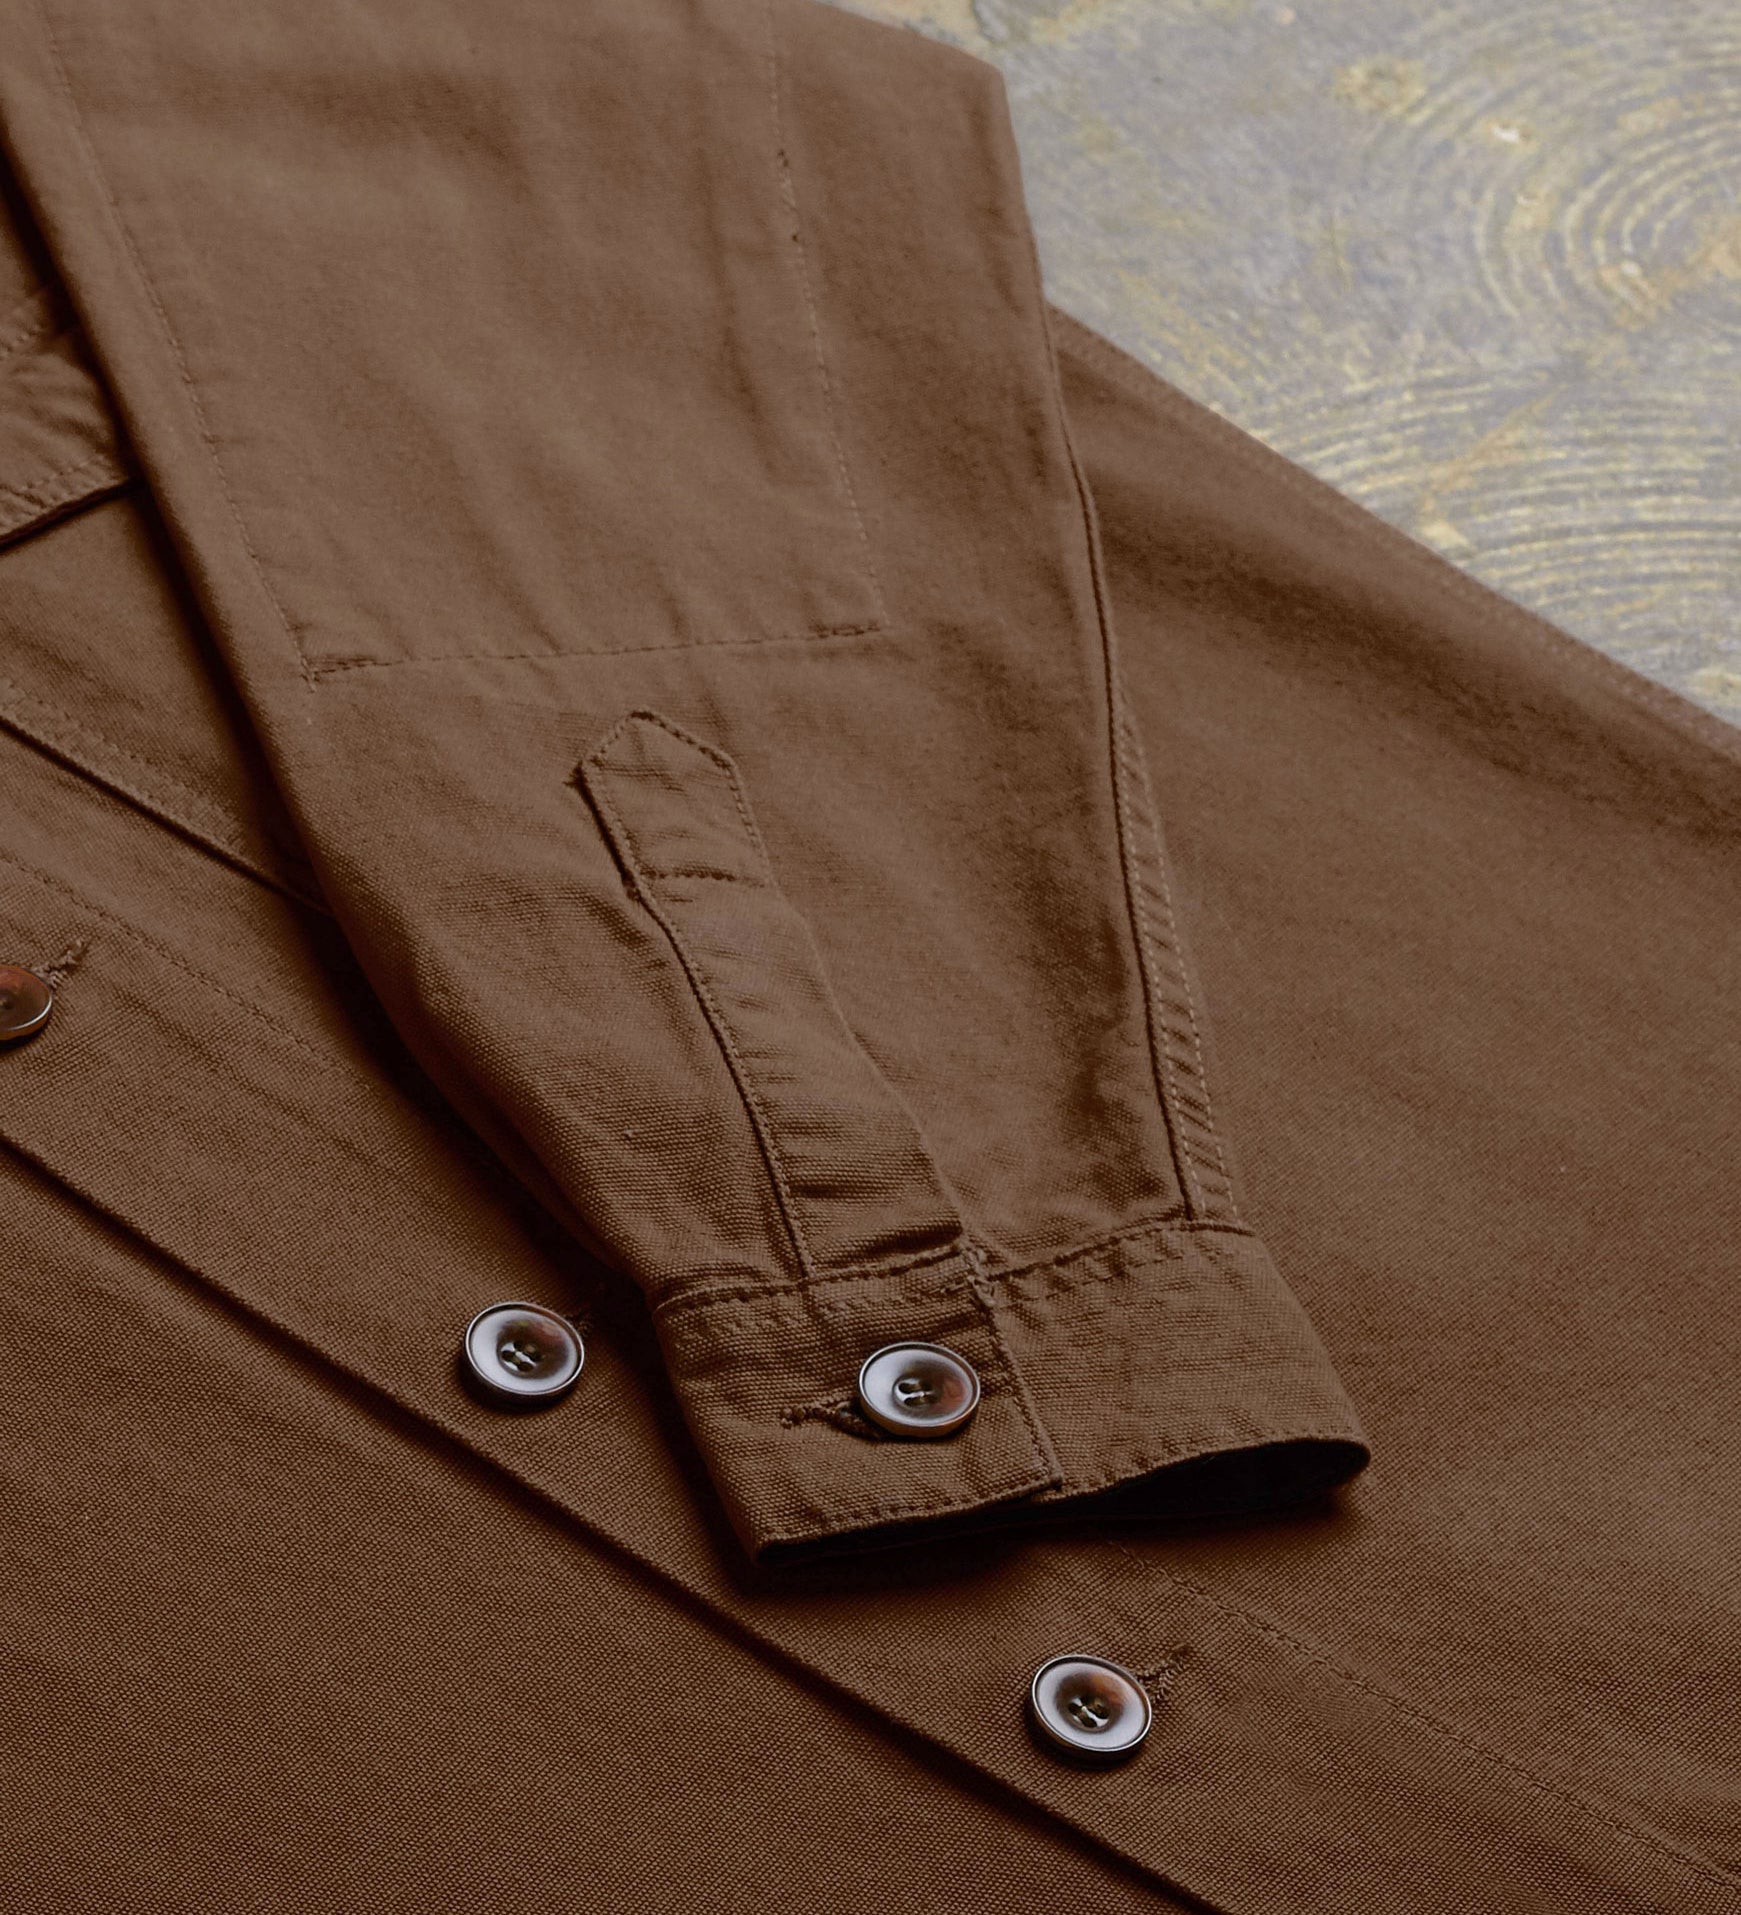 Angled flat view of the mid-section and sleeve of the #3003 Uskees button-down work shirt in brown, with focus on cuff, placket, reinforced elbow and corozo buttons.